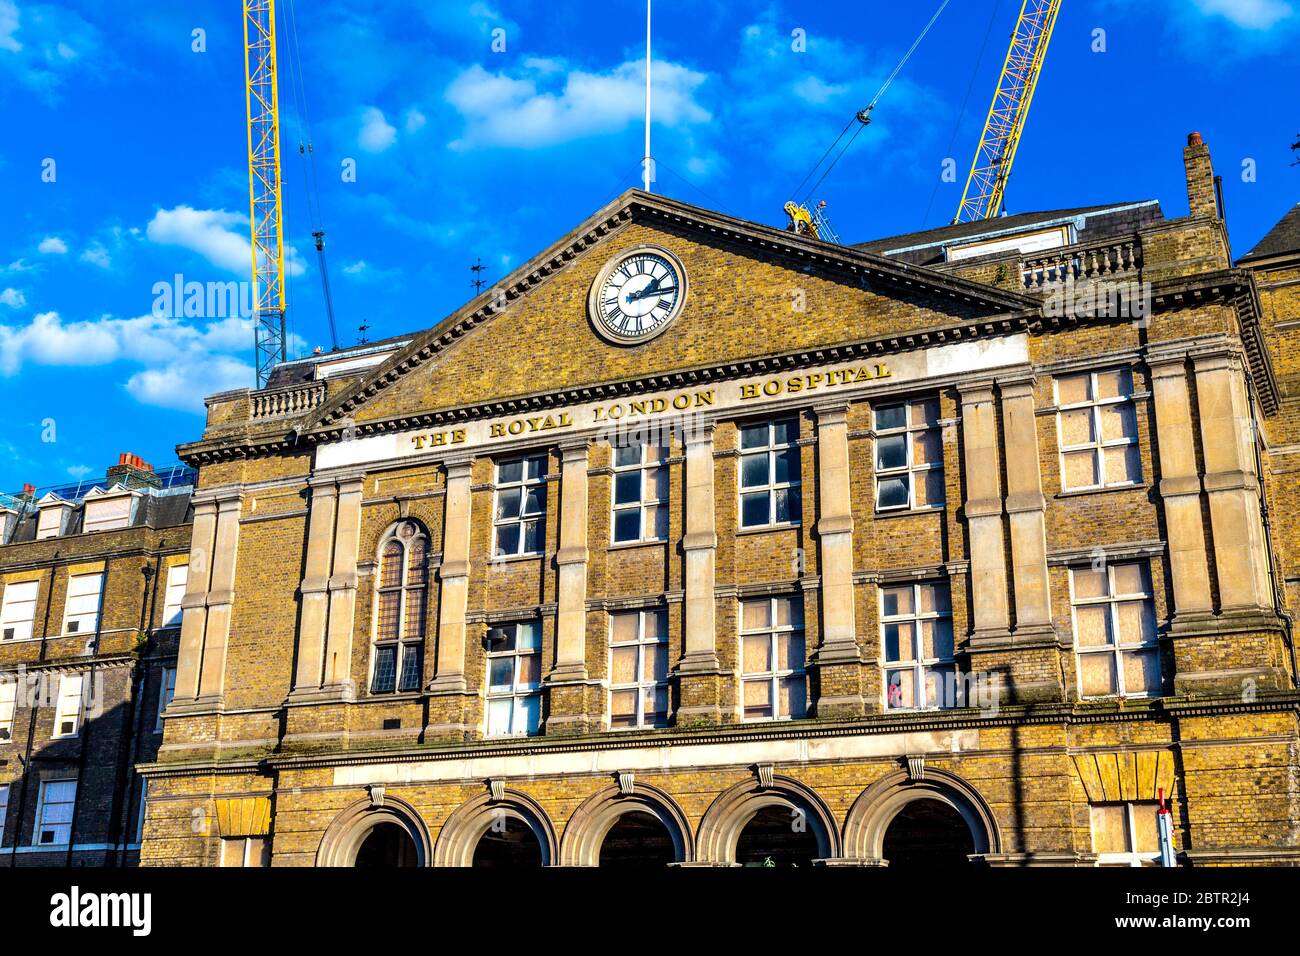 Facade of the old Royal London Hospital building with clock, currently being converted into a new civic centre for Tower Hamlets Council, London, UK Stock Photo